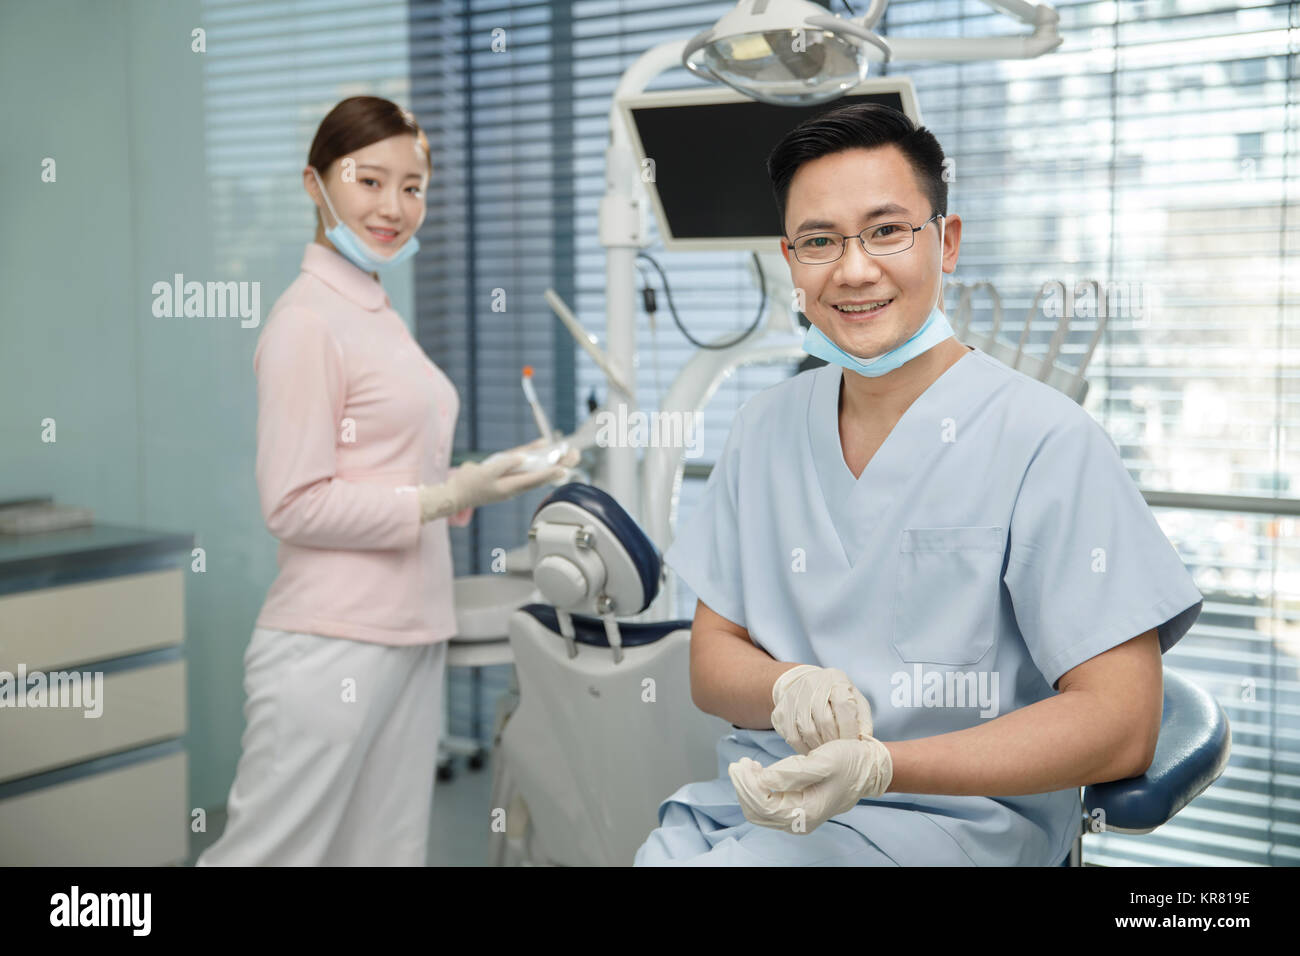 A male dentist and a dental assistant Stock Photo